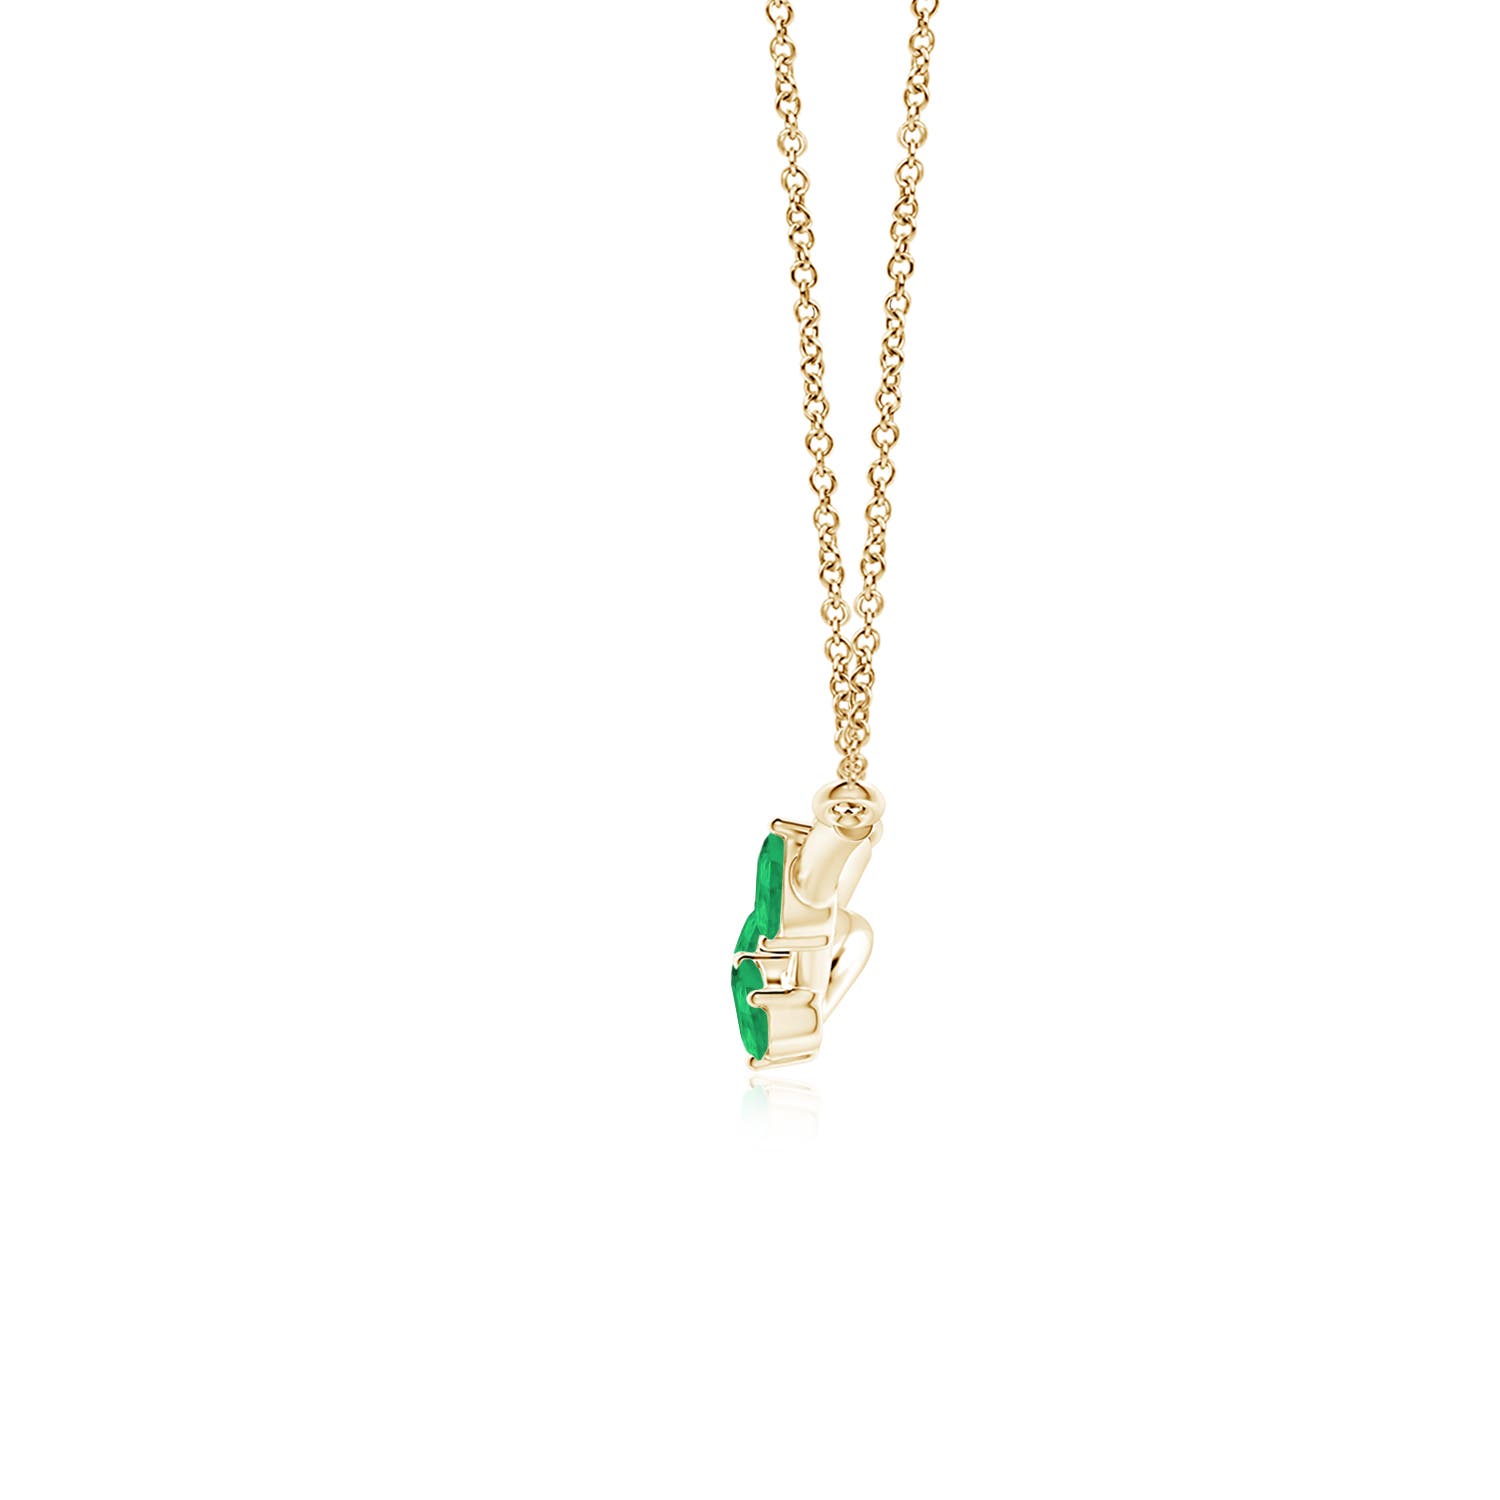 A - Emerald / 0.6 CT / 14 KT Yellow Gold